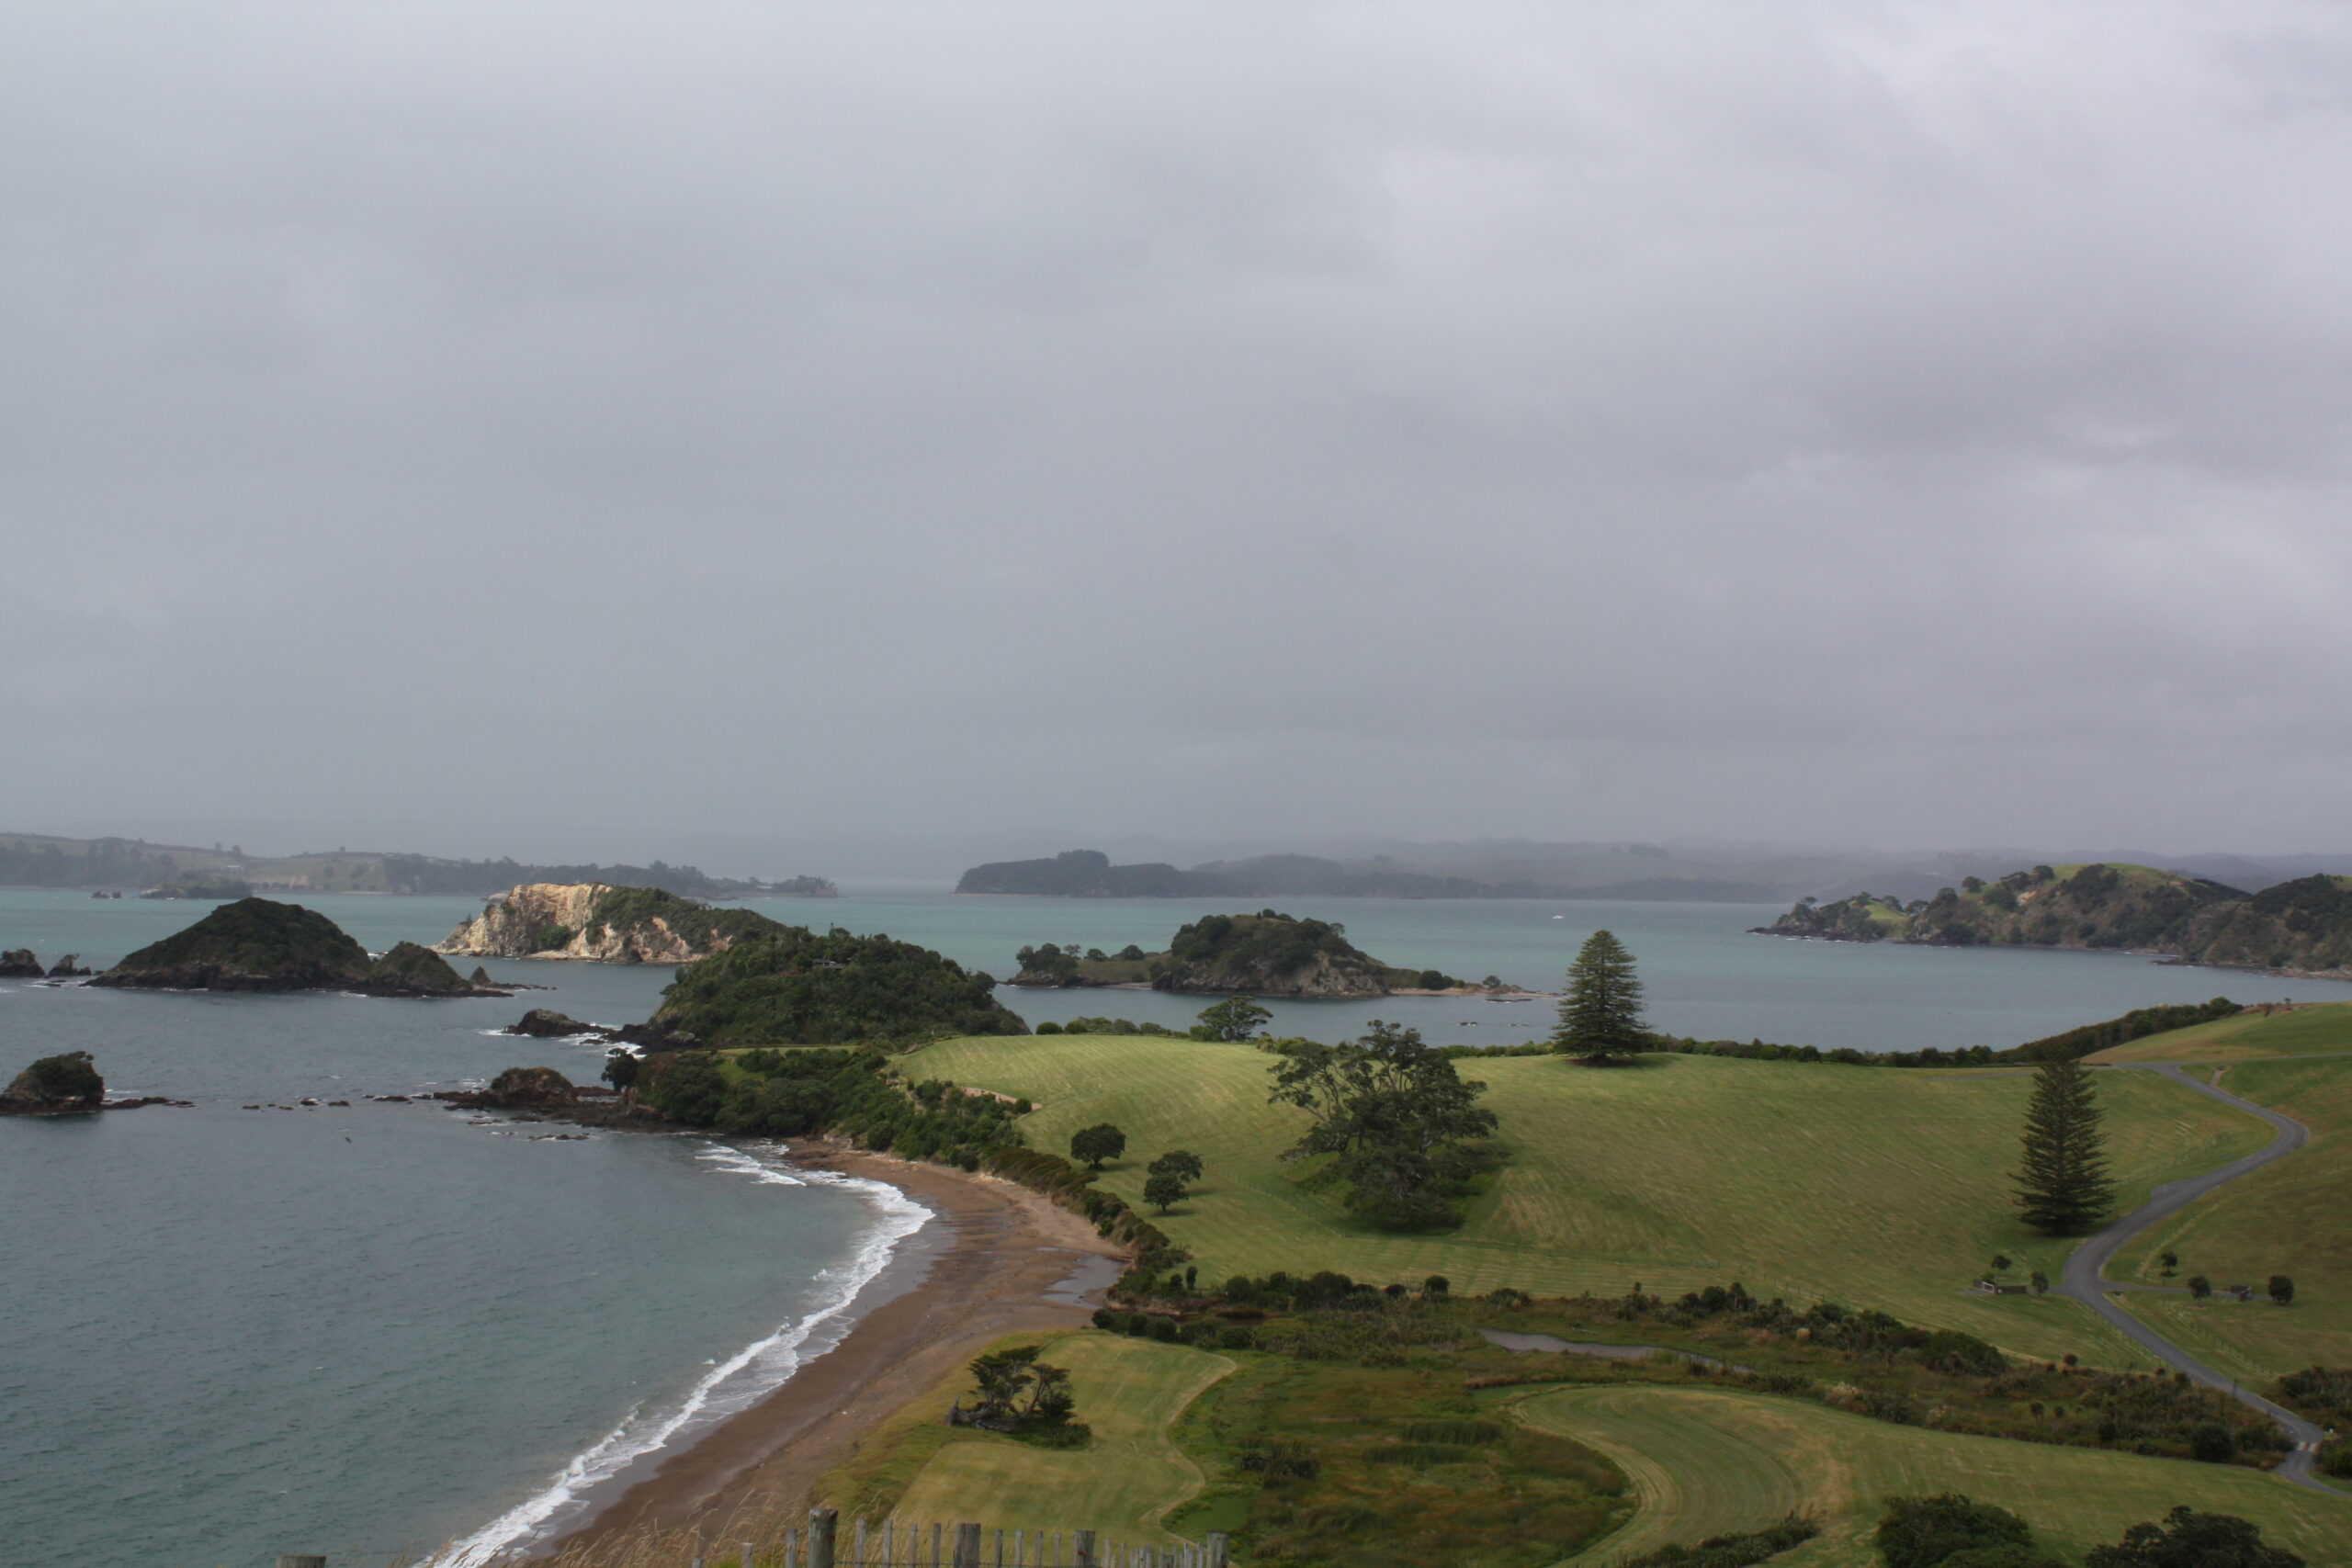 Looking out from Rangihoua Pā at the Te Pahi Islands, photo by Jessie Garland